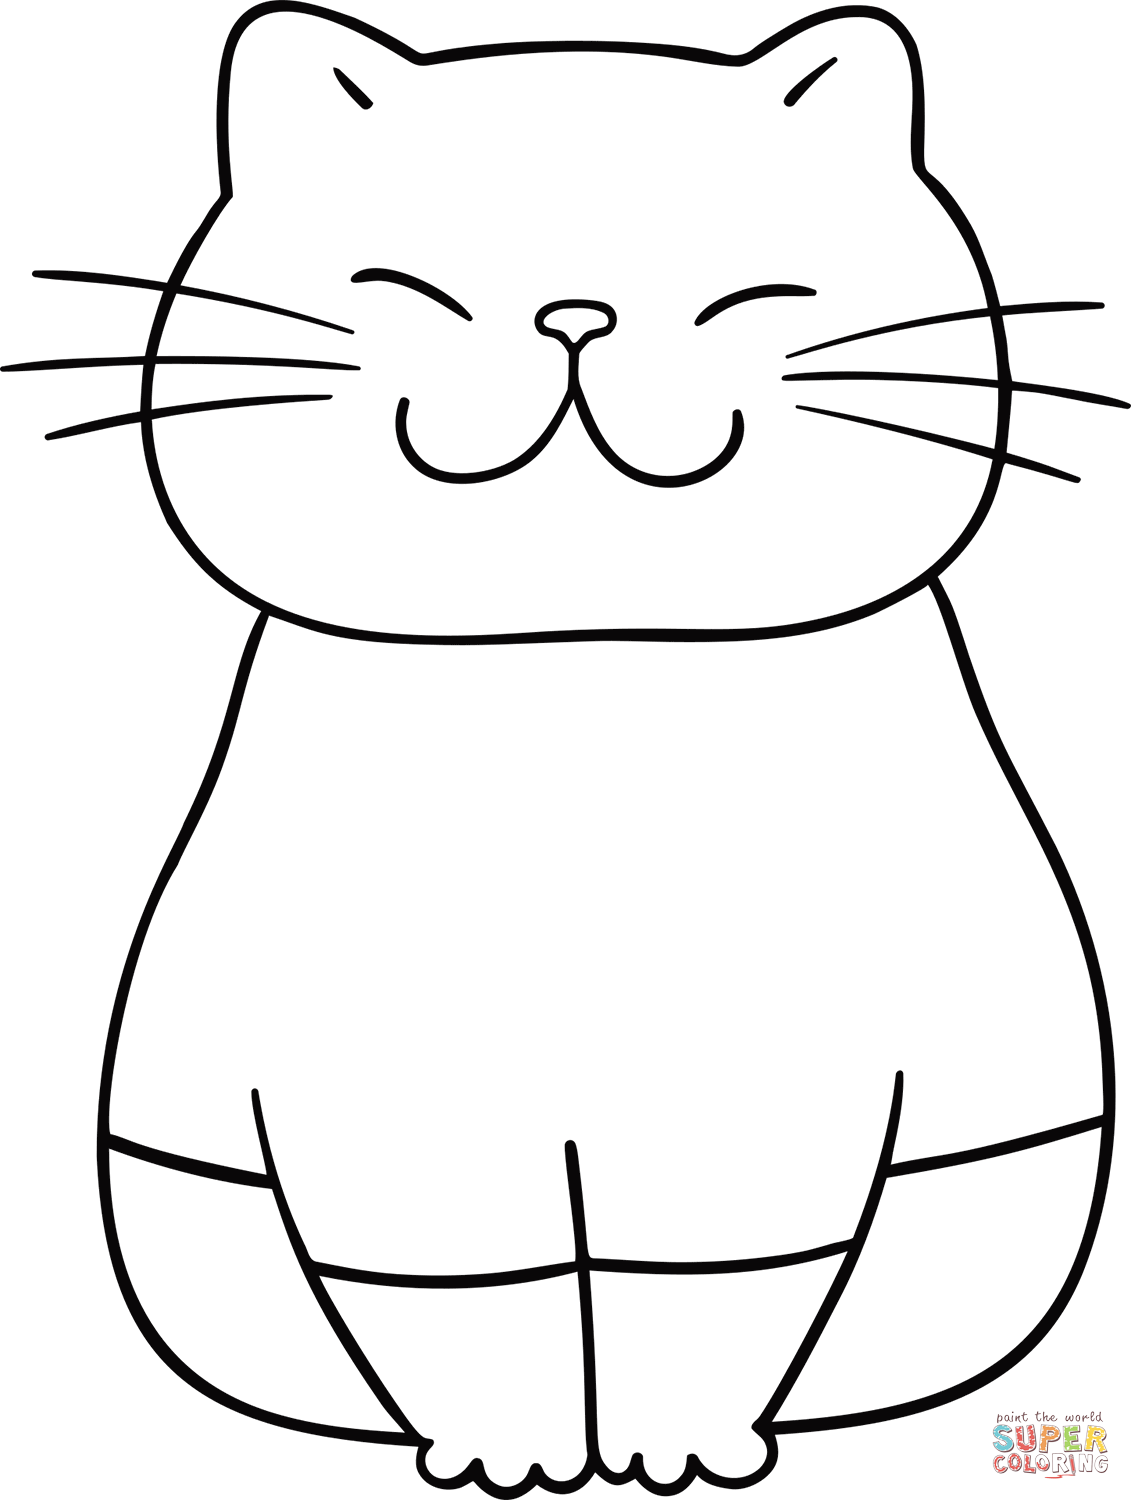 Cute cat coloring page free printable coloring pages